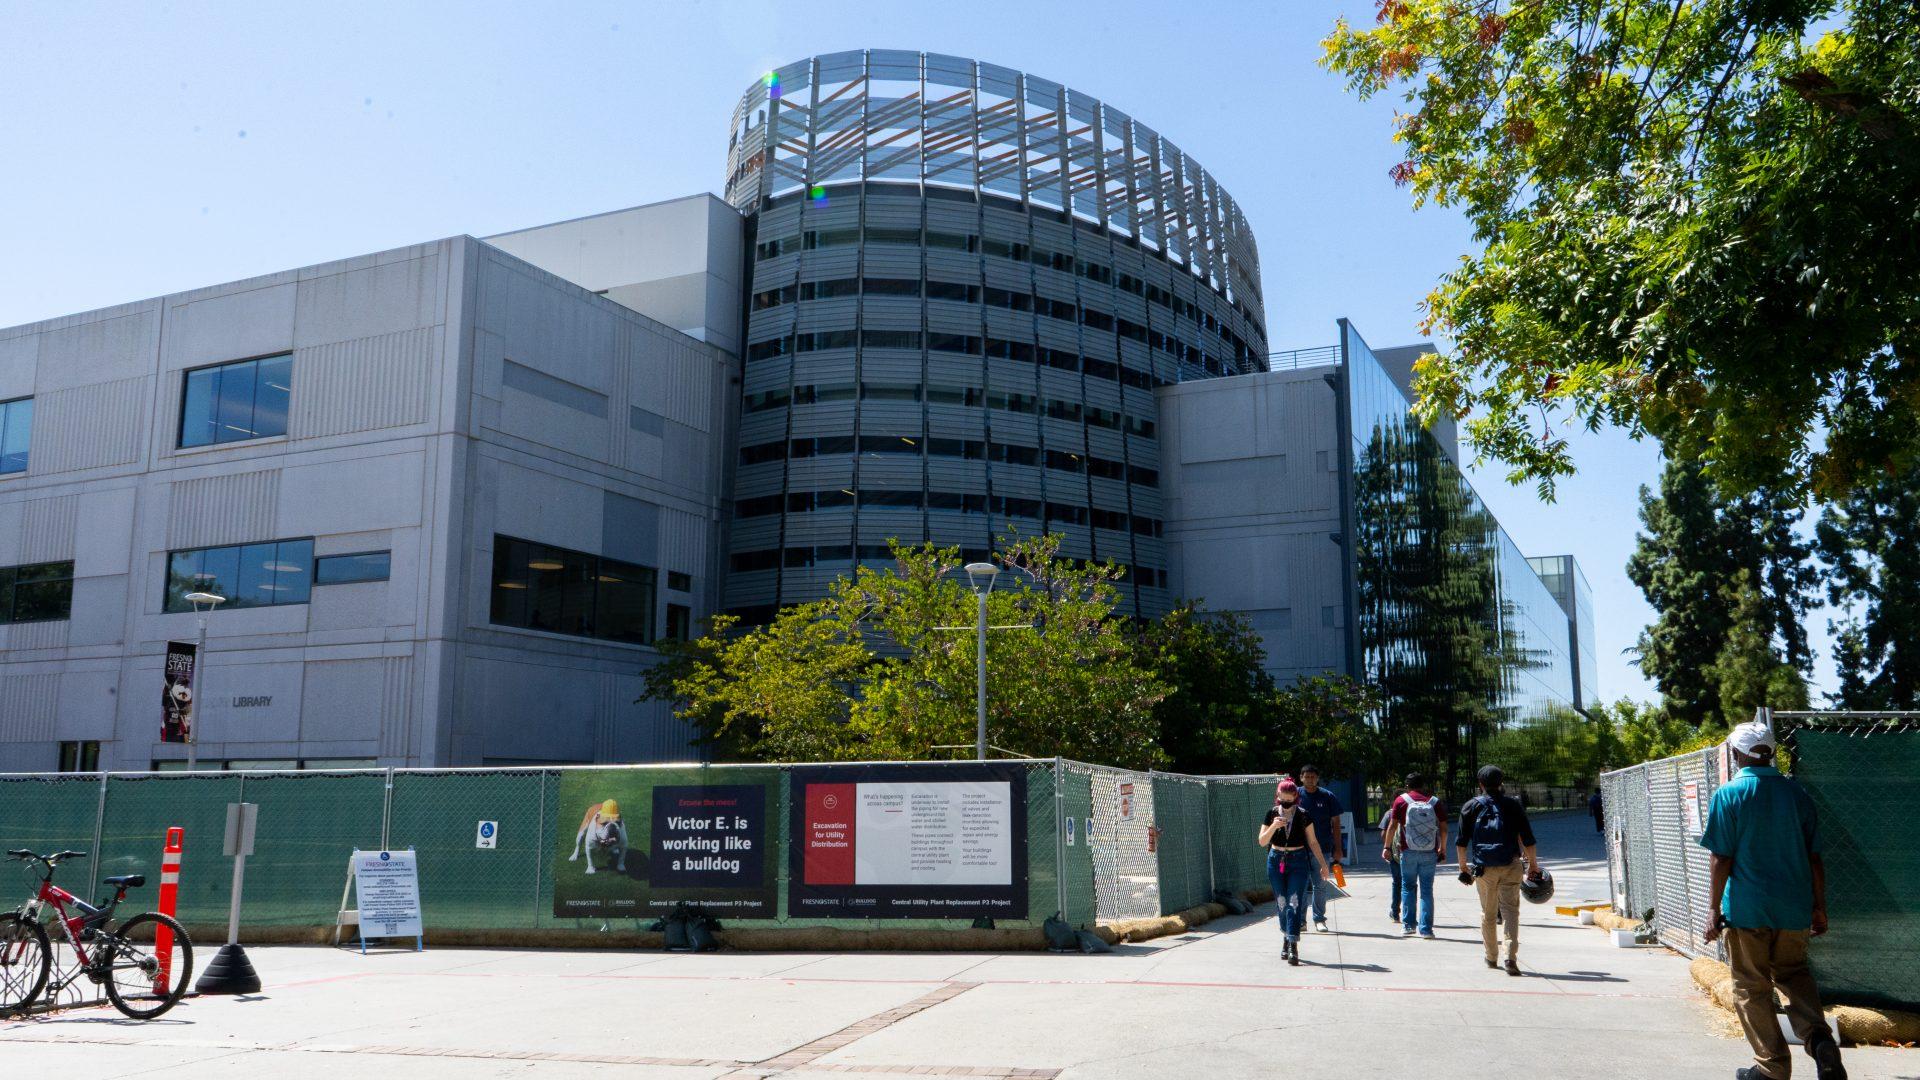 Fresno State President SaÃºl JimÃ©nez-Sandoval released a campus-wide email announcing “an excessive heat warning” from Sept. 6 throughout Sept. 9, according to the National Weather Services in a campus-wide email. (Eric Martinez/The Collegian)